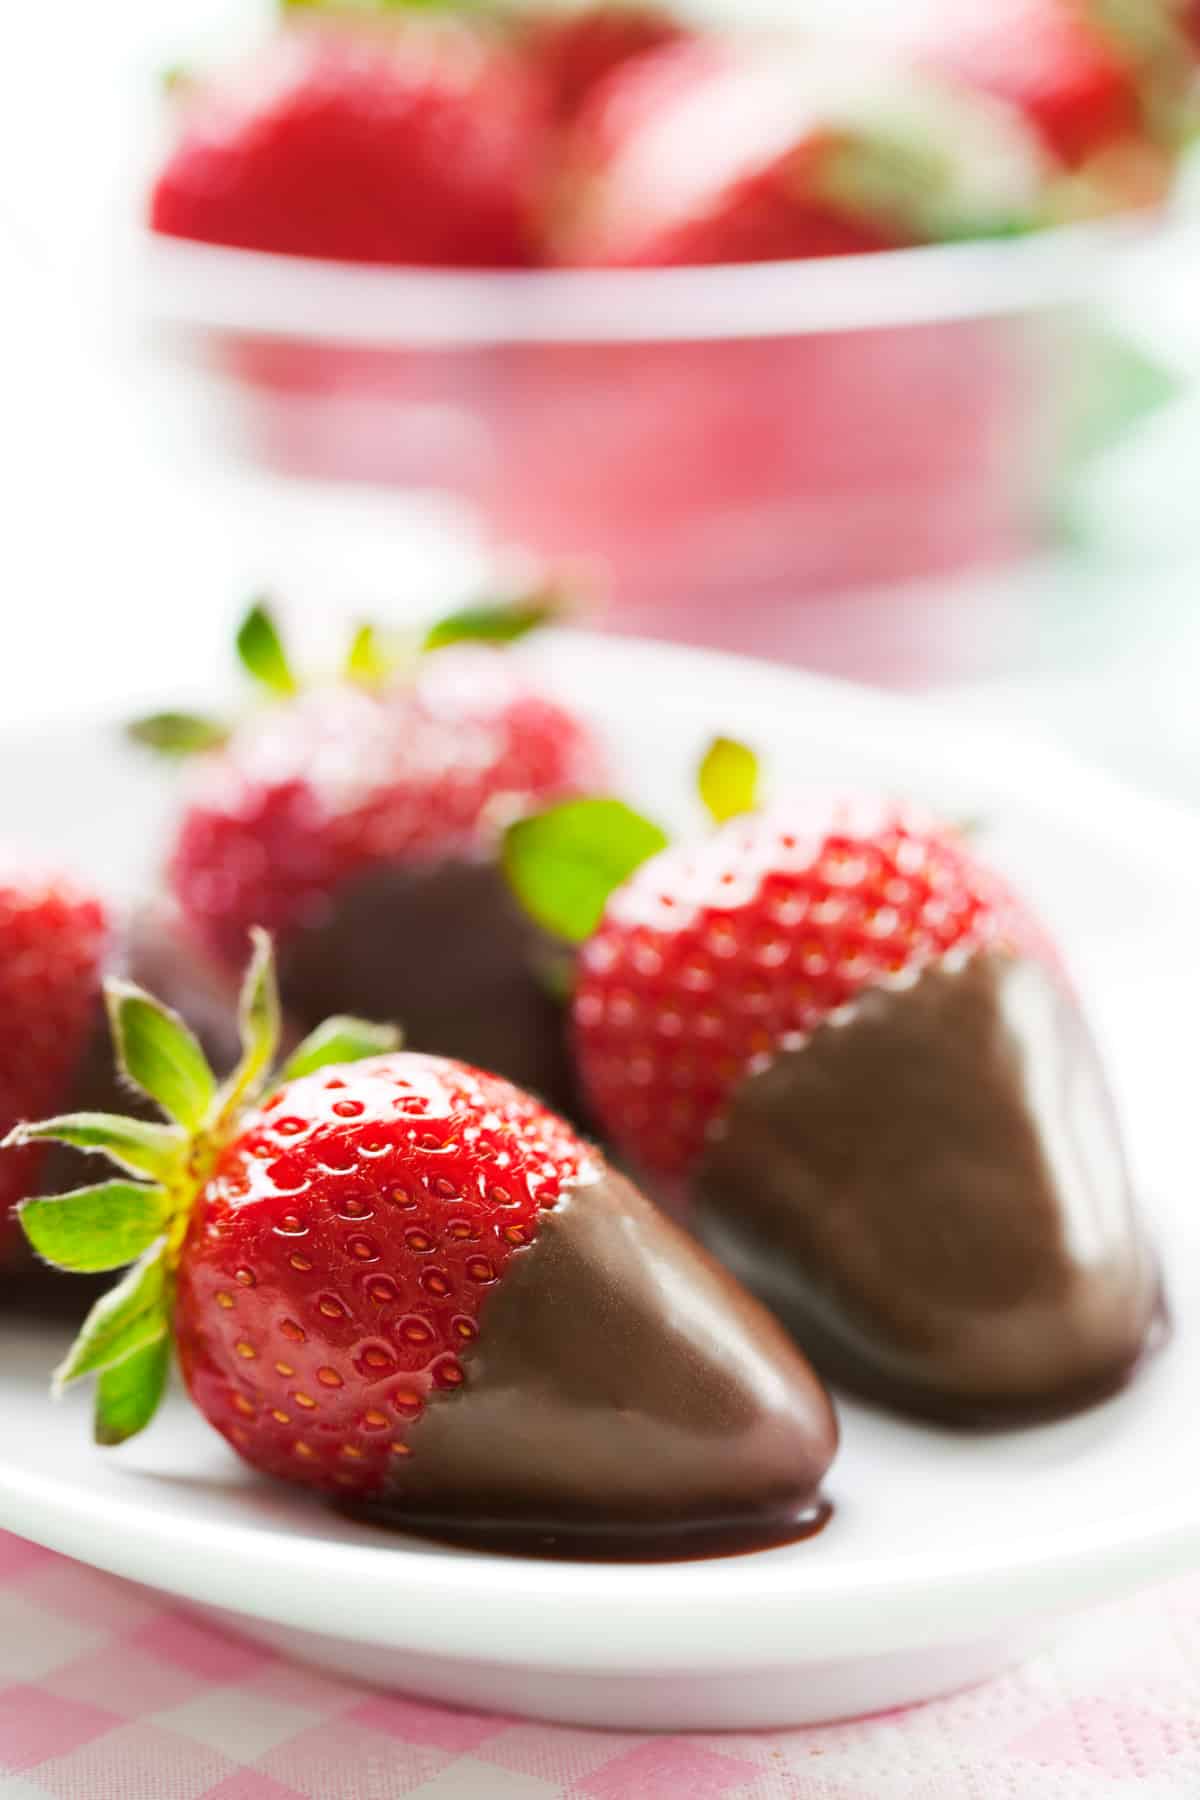 Strawberries dipped in melted chocolate chips.